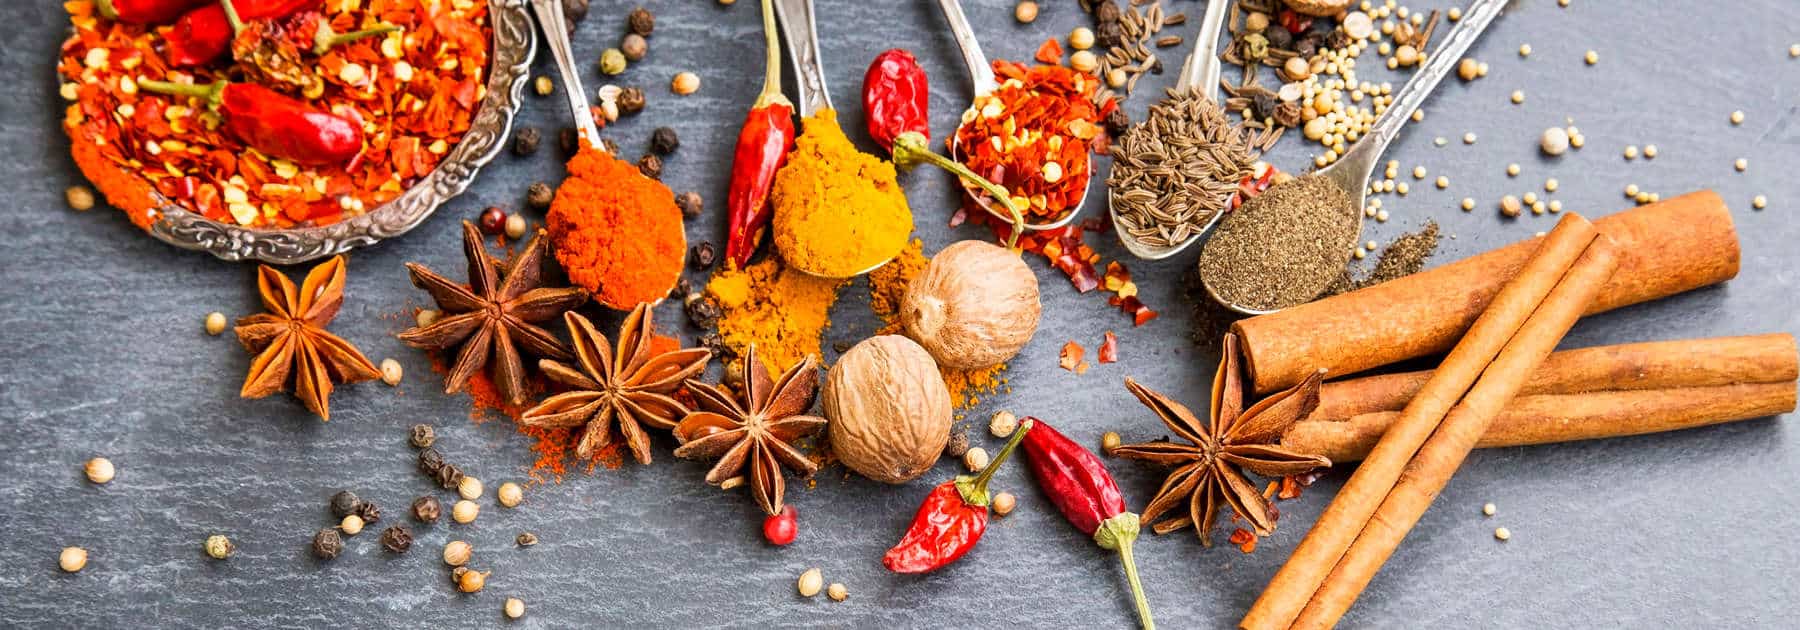 How to Use Spices Like a Pro | House of Knives Blog